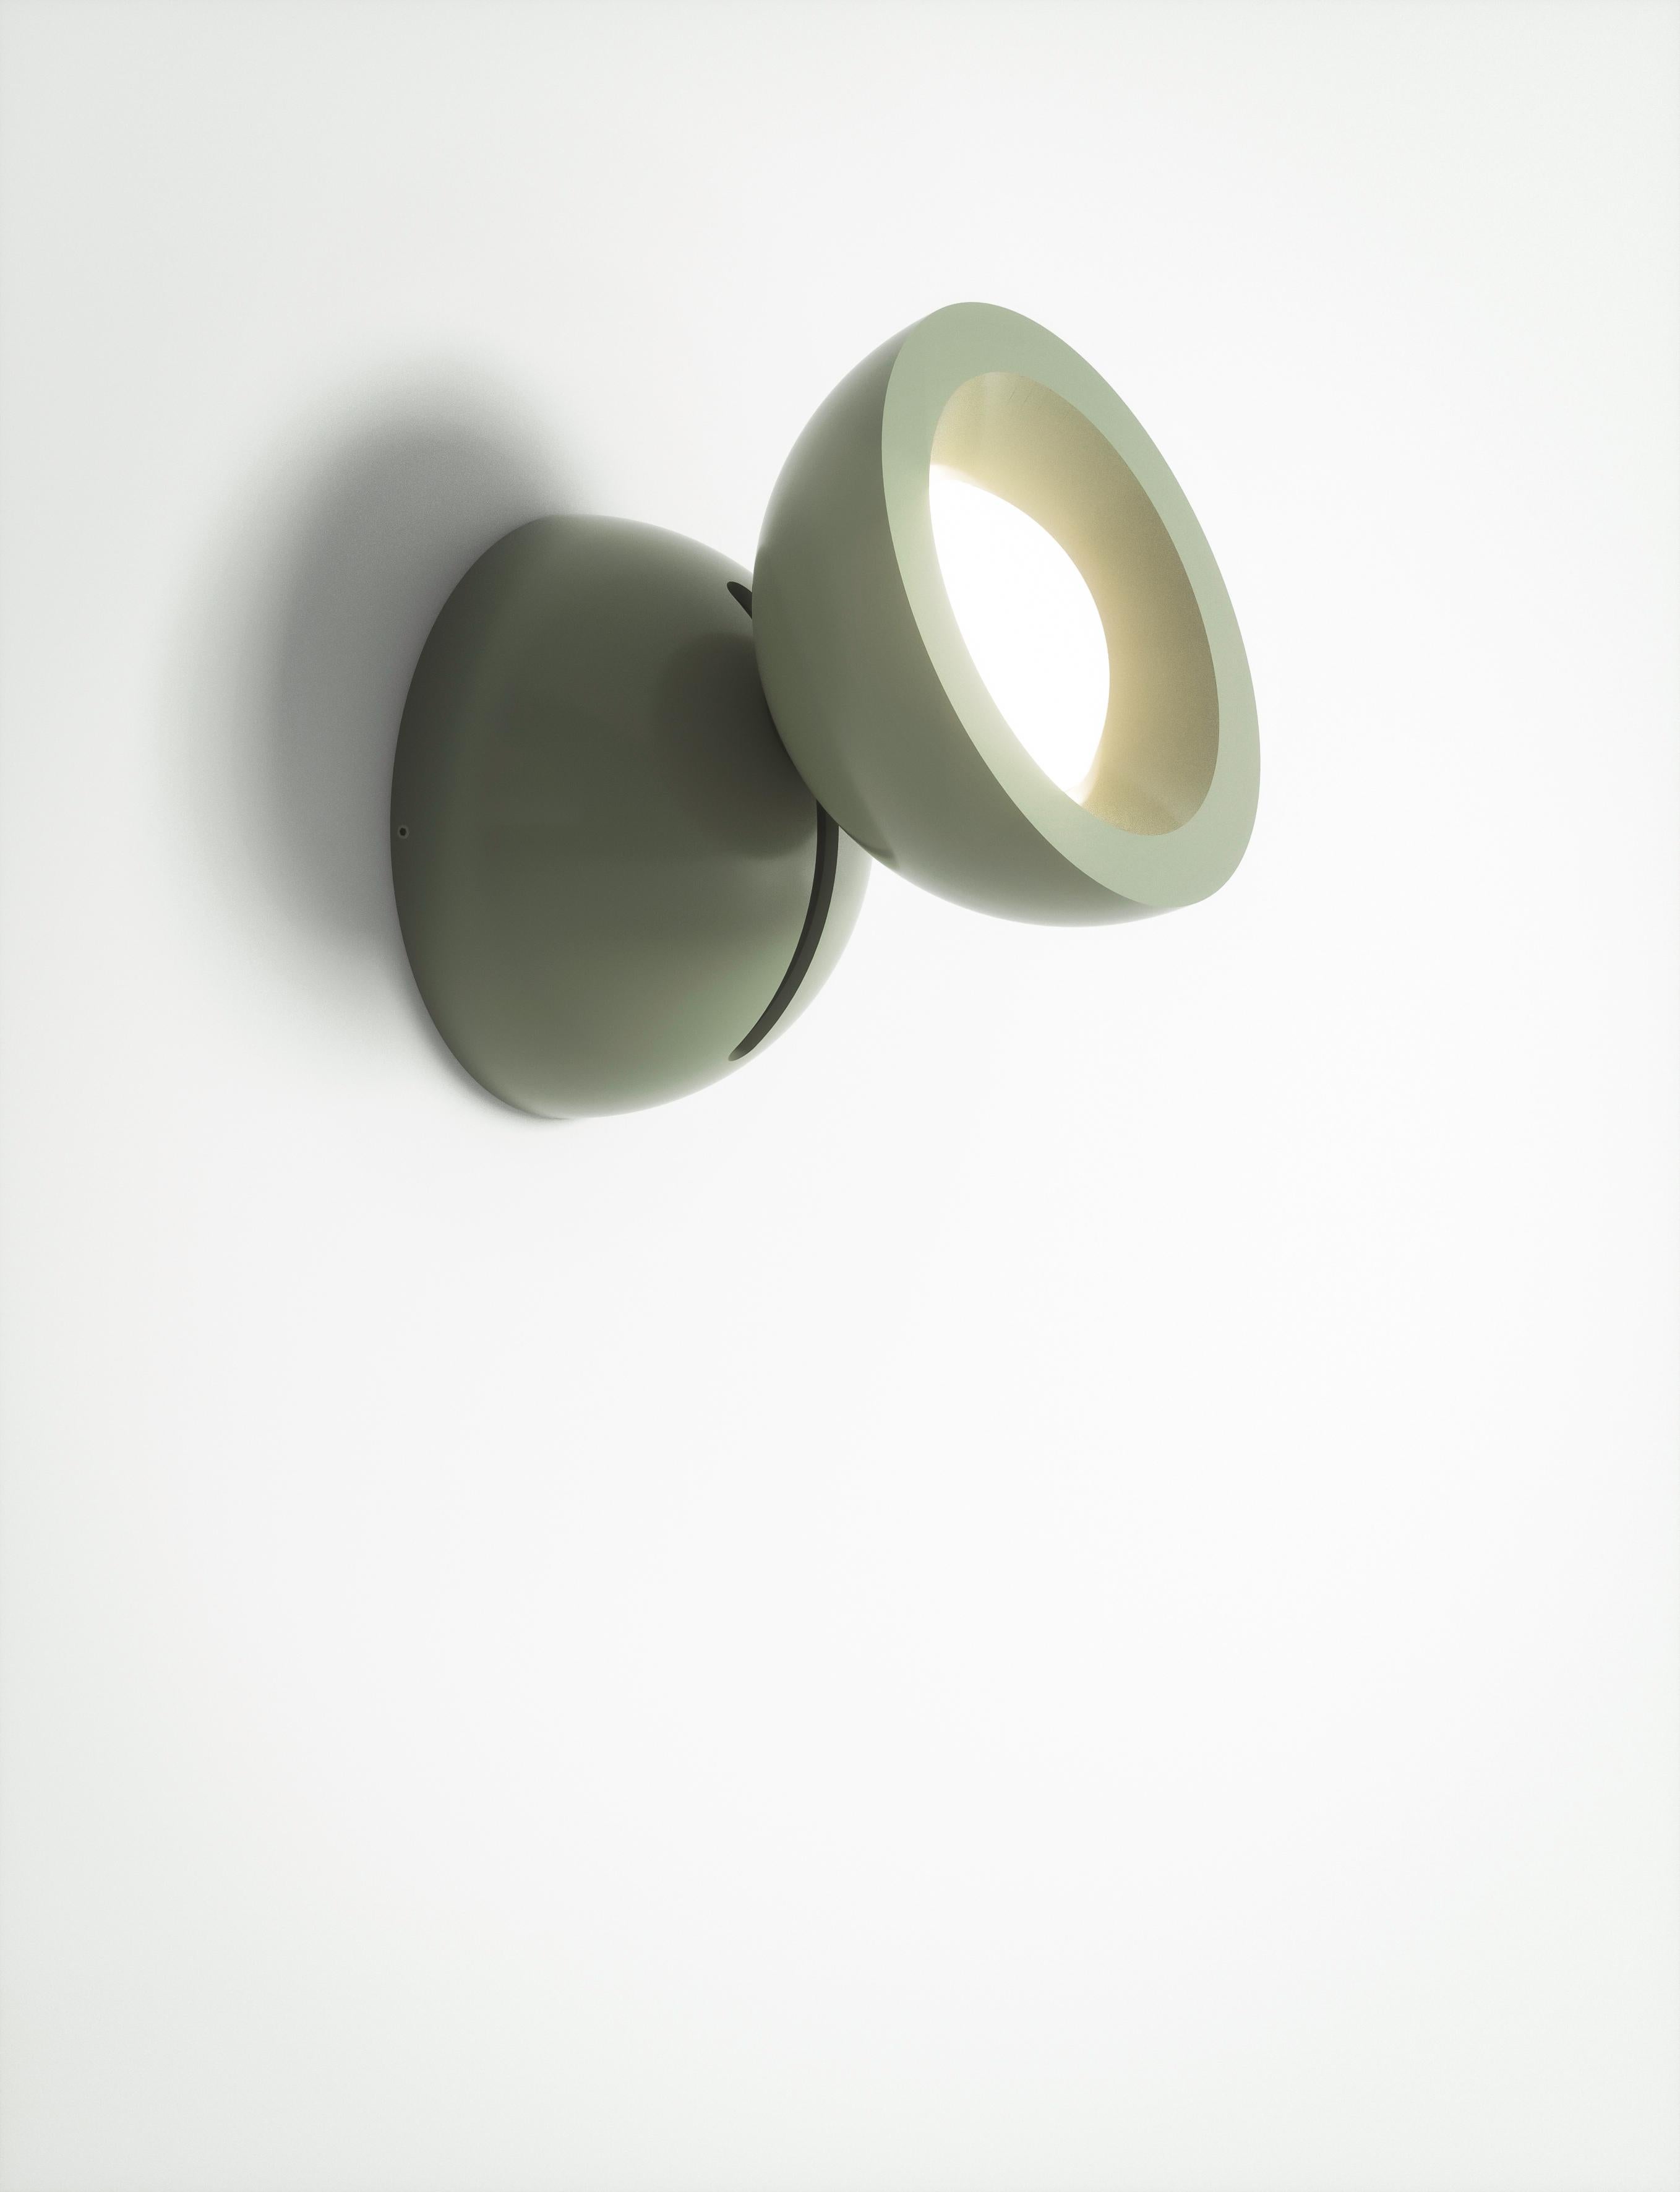 Axolight DoDot Wall/ Ceiling Light in Concrete Green Aluminum by Simone Micheli

DoDot, the latest creation of architect and designer Simone Micheli is the new adjustable lamp by Axolight, suitable for ceiling and wall

Compact and performing, DoDot